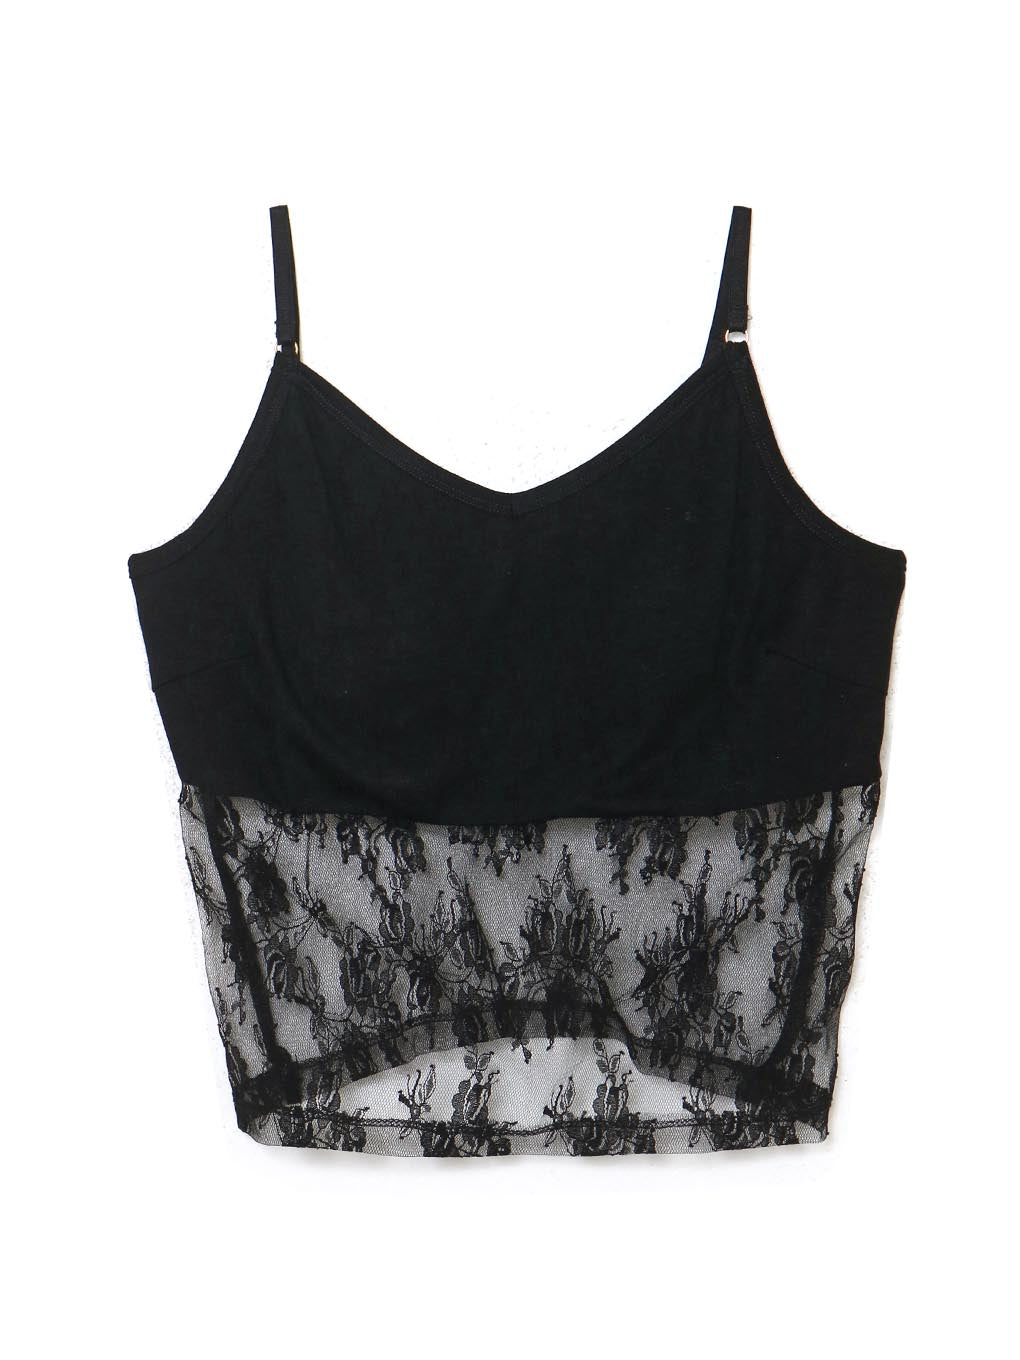 Everyday lace camisole